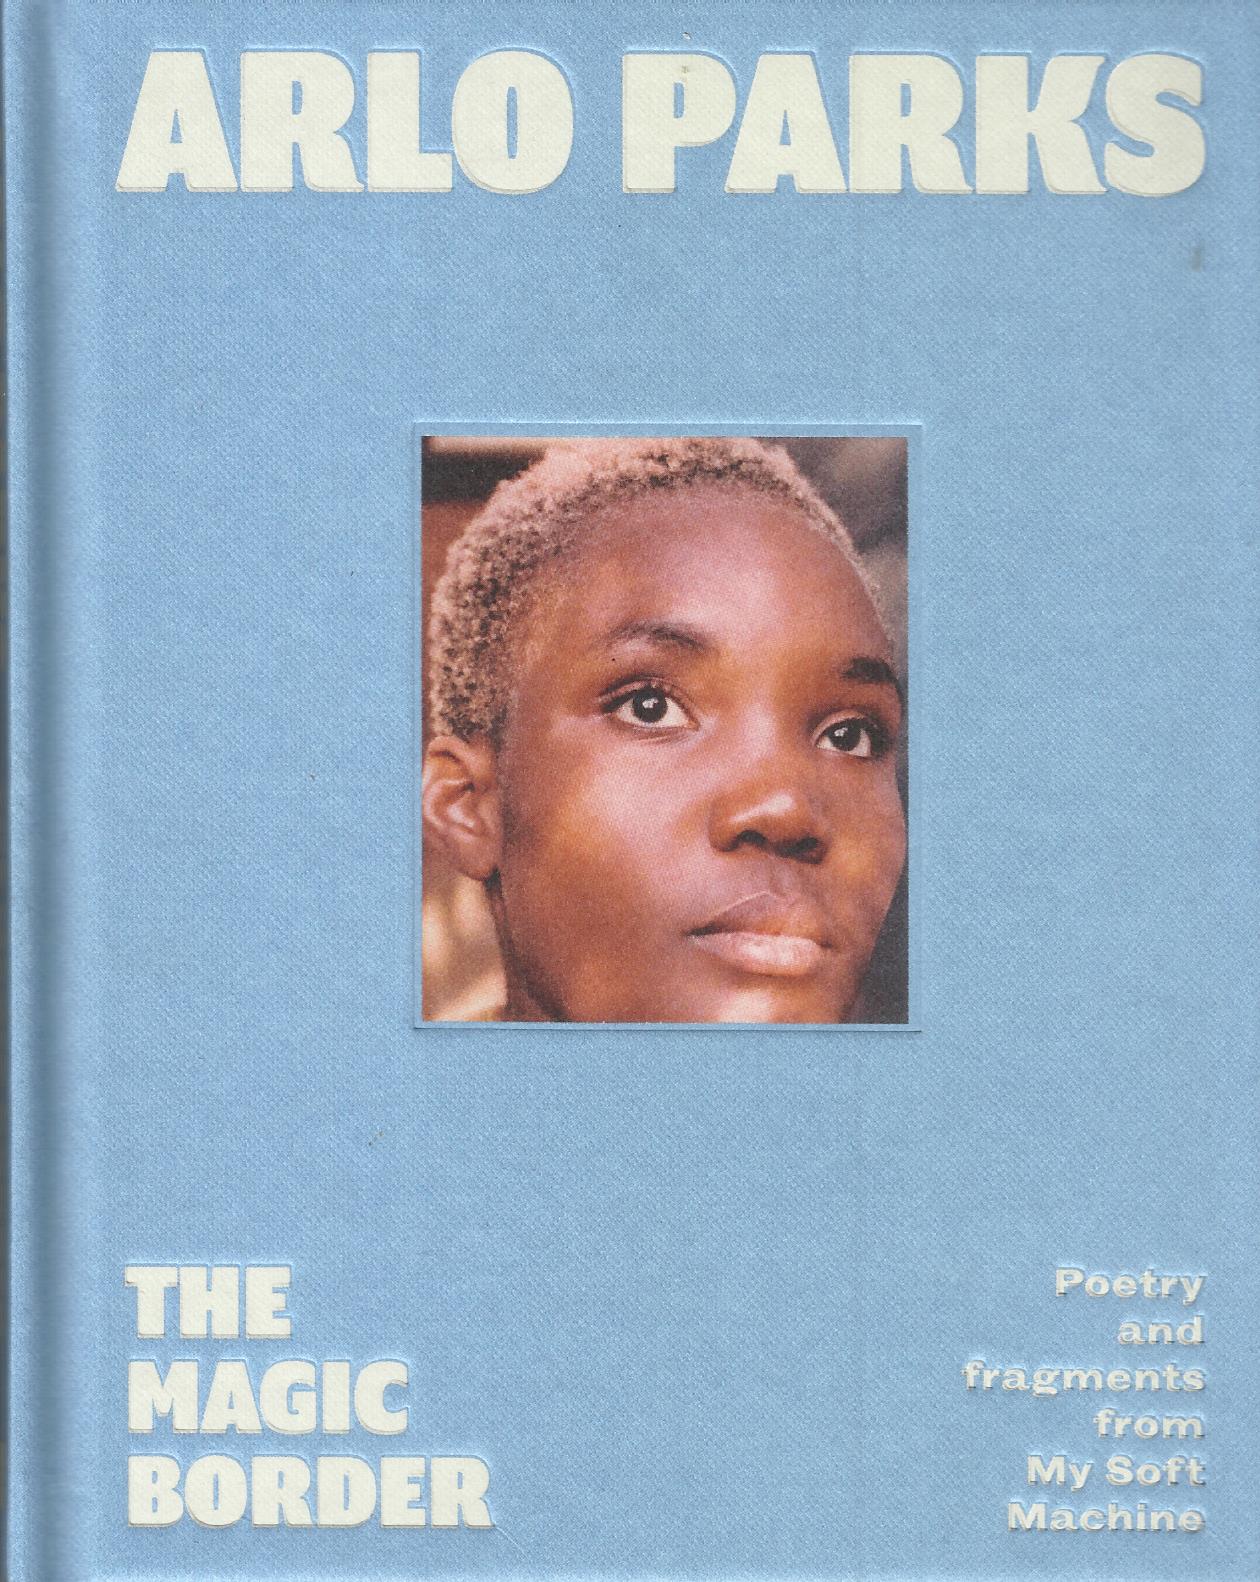 The front cover of Arlo Parks's 'The Magic Border'